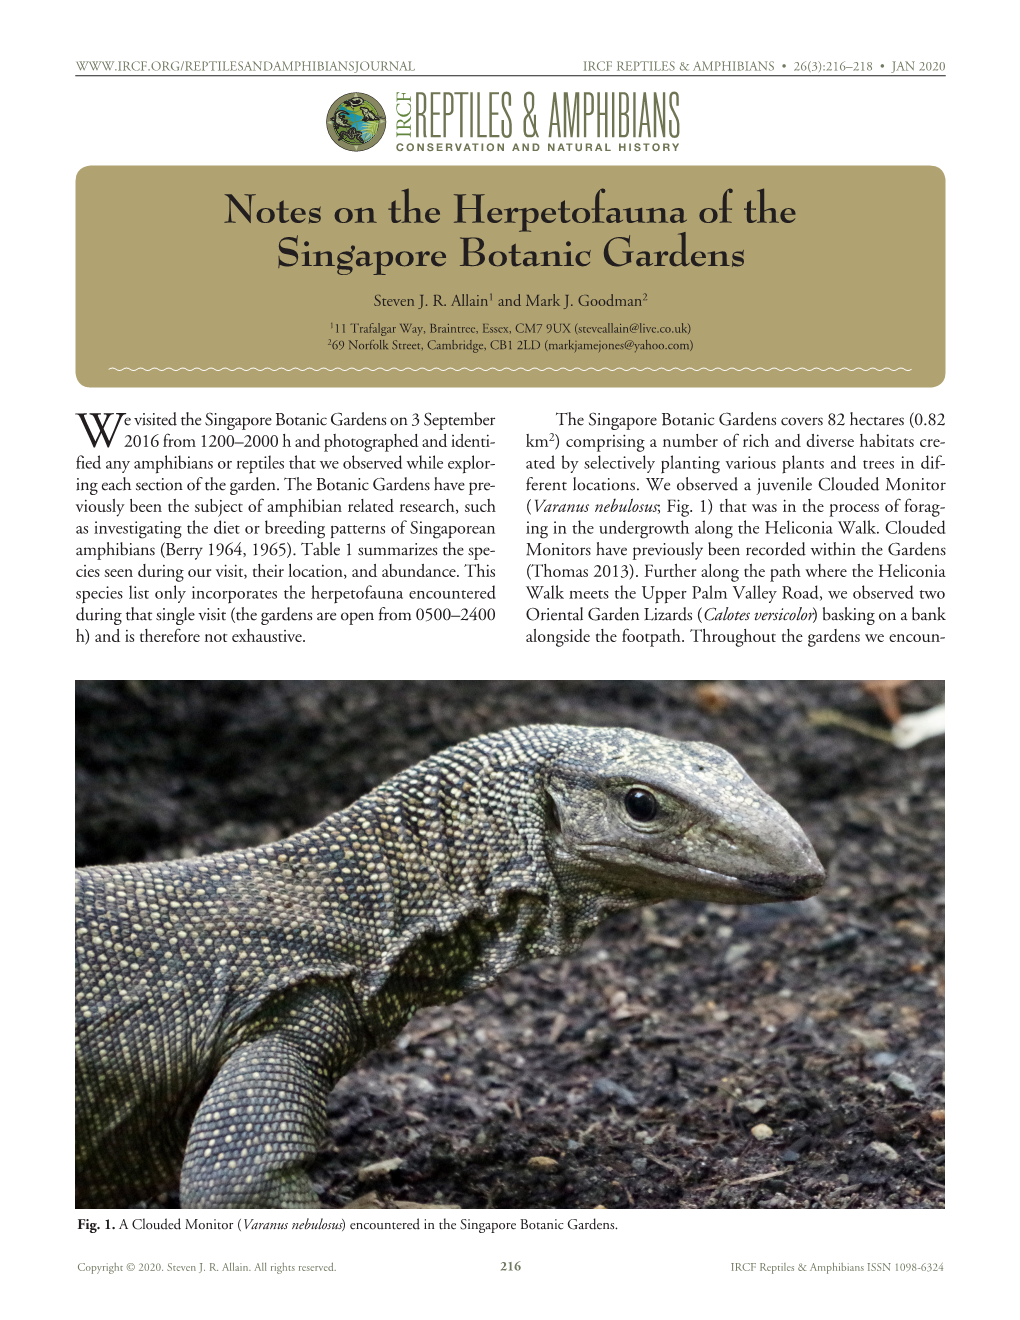 Notes on the Herpetofauna of The